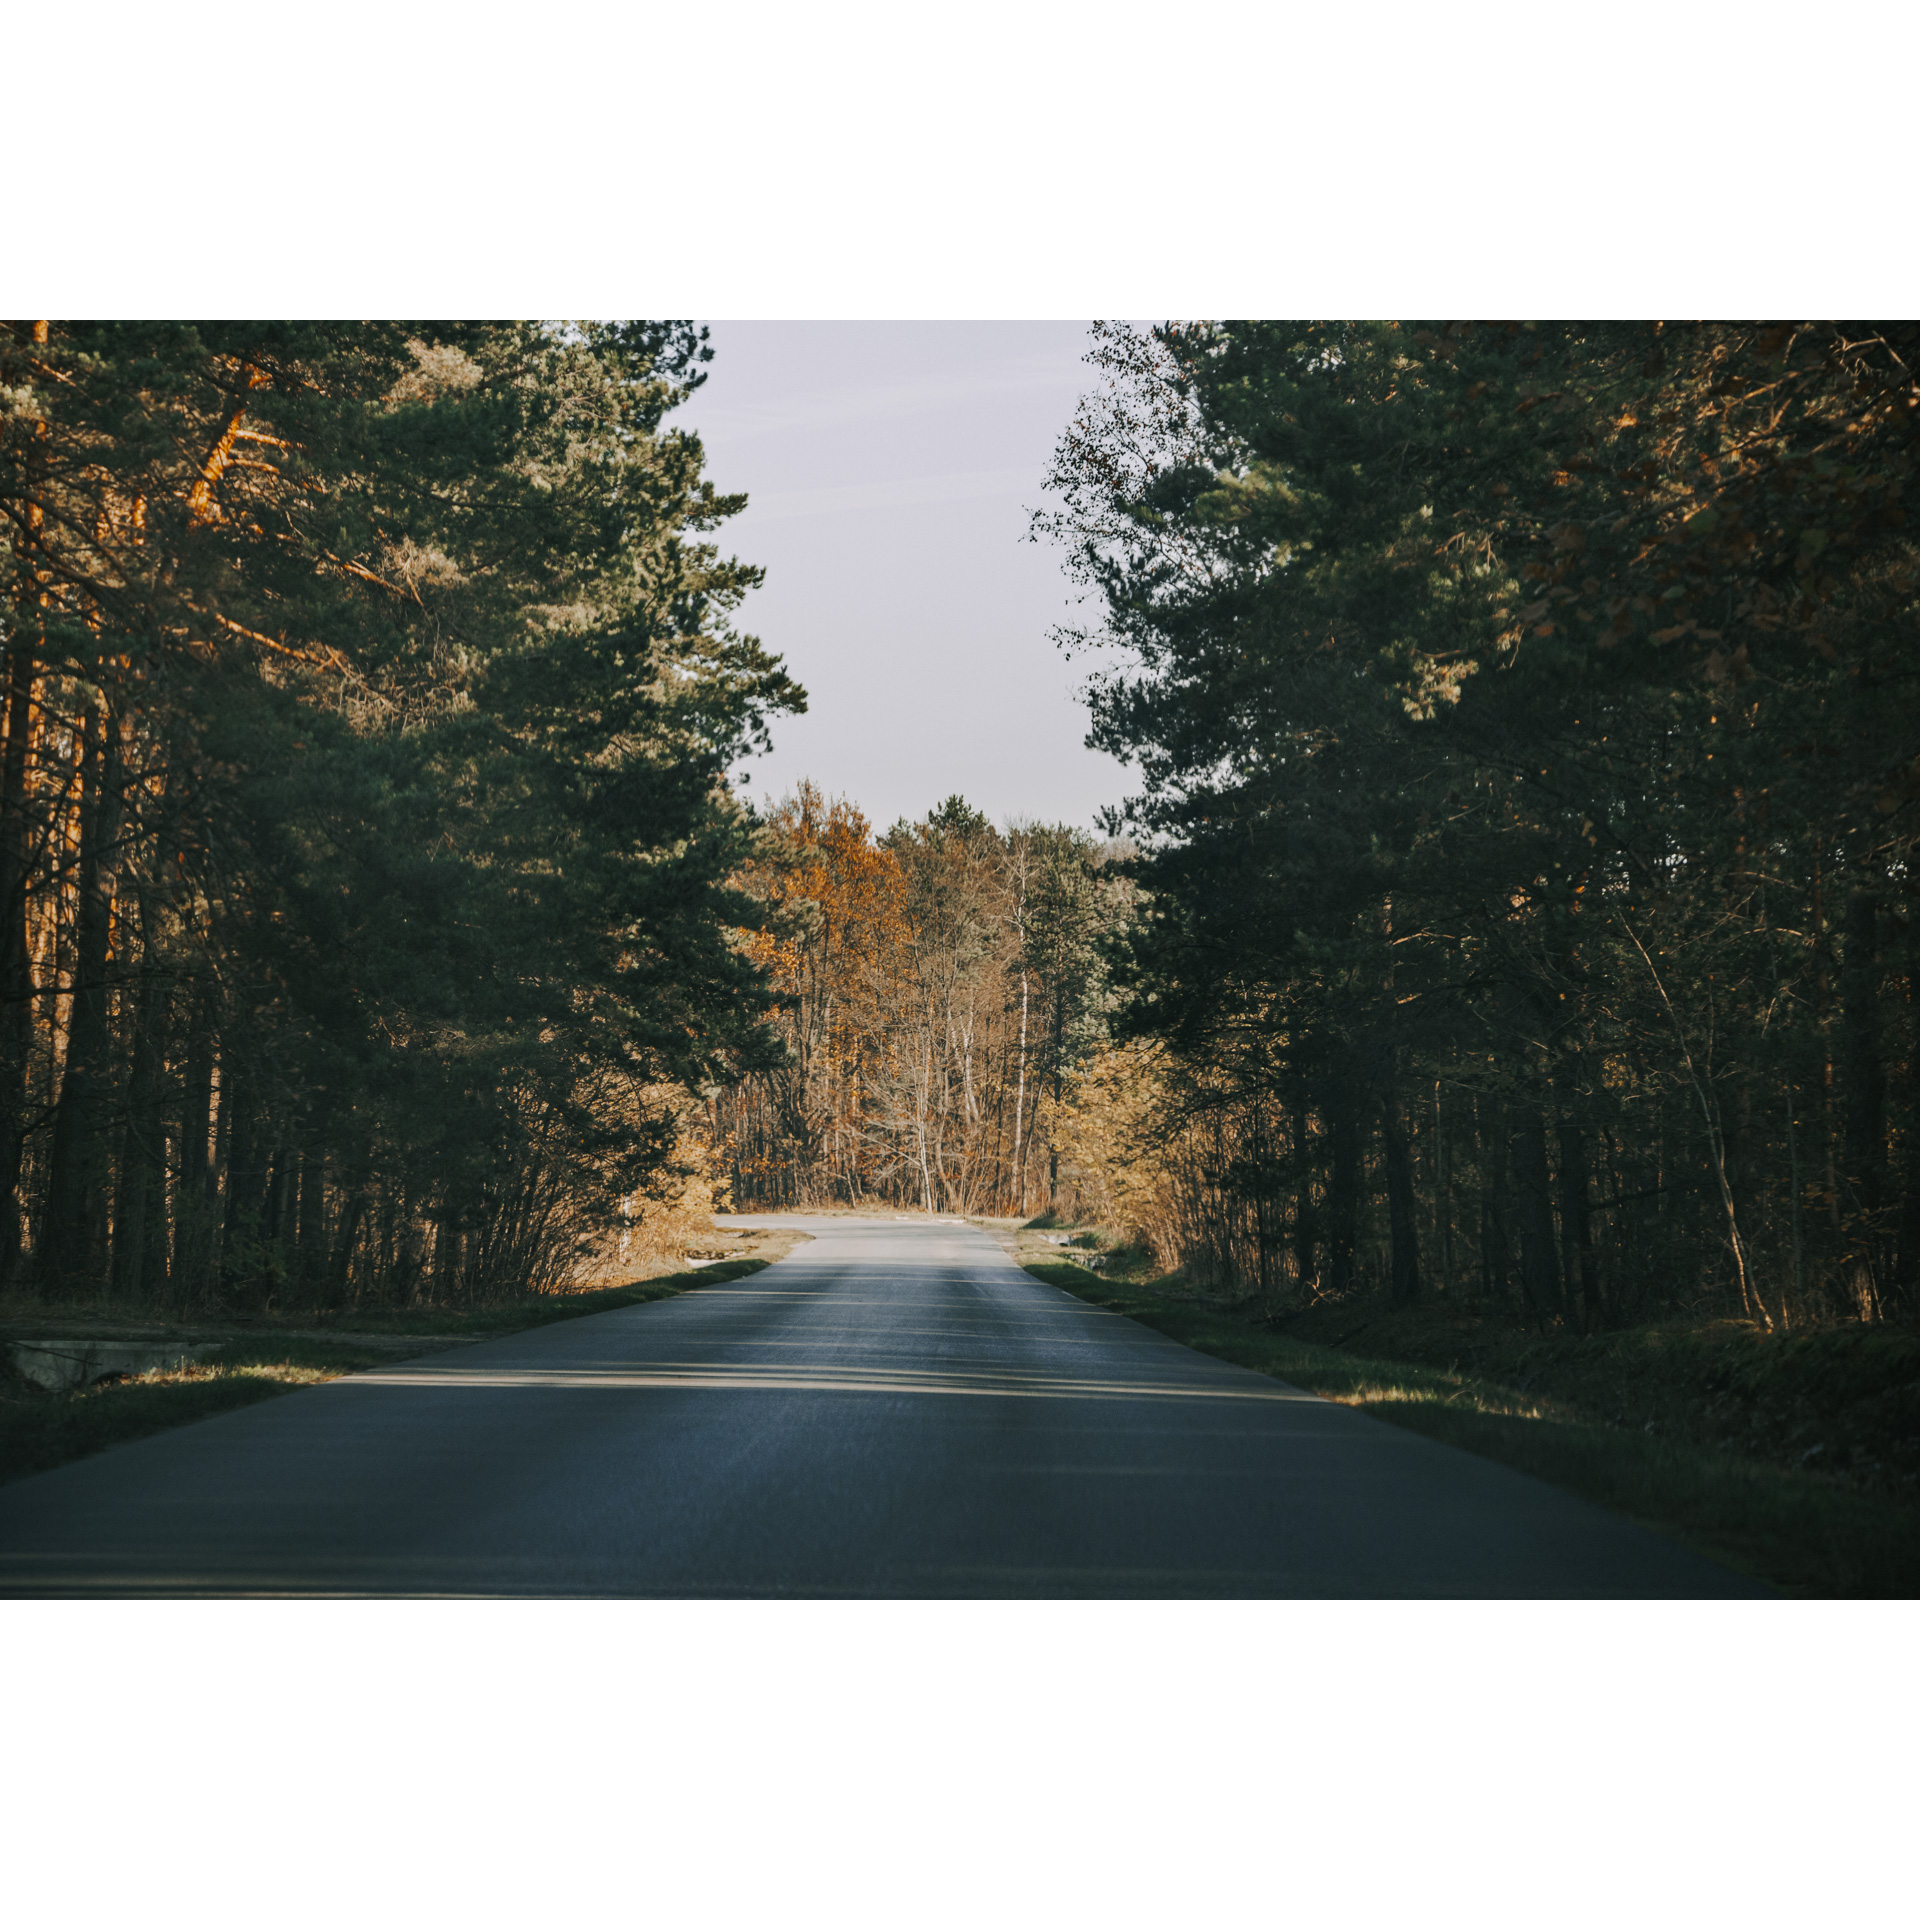 A forest asphalt road leading straight, tall coniferous and deciduous trees all around illuminated by the sun